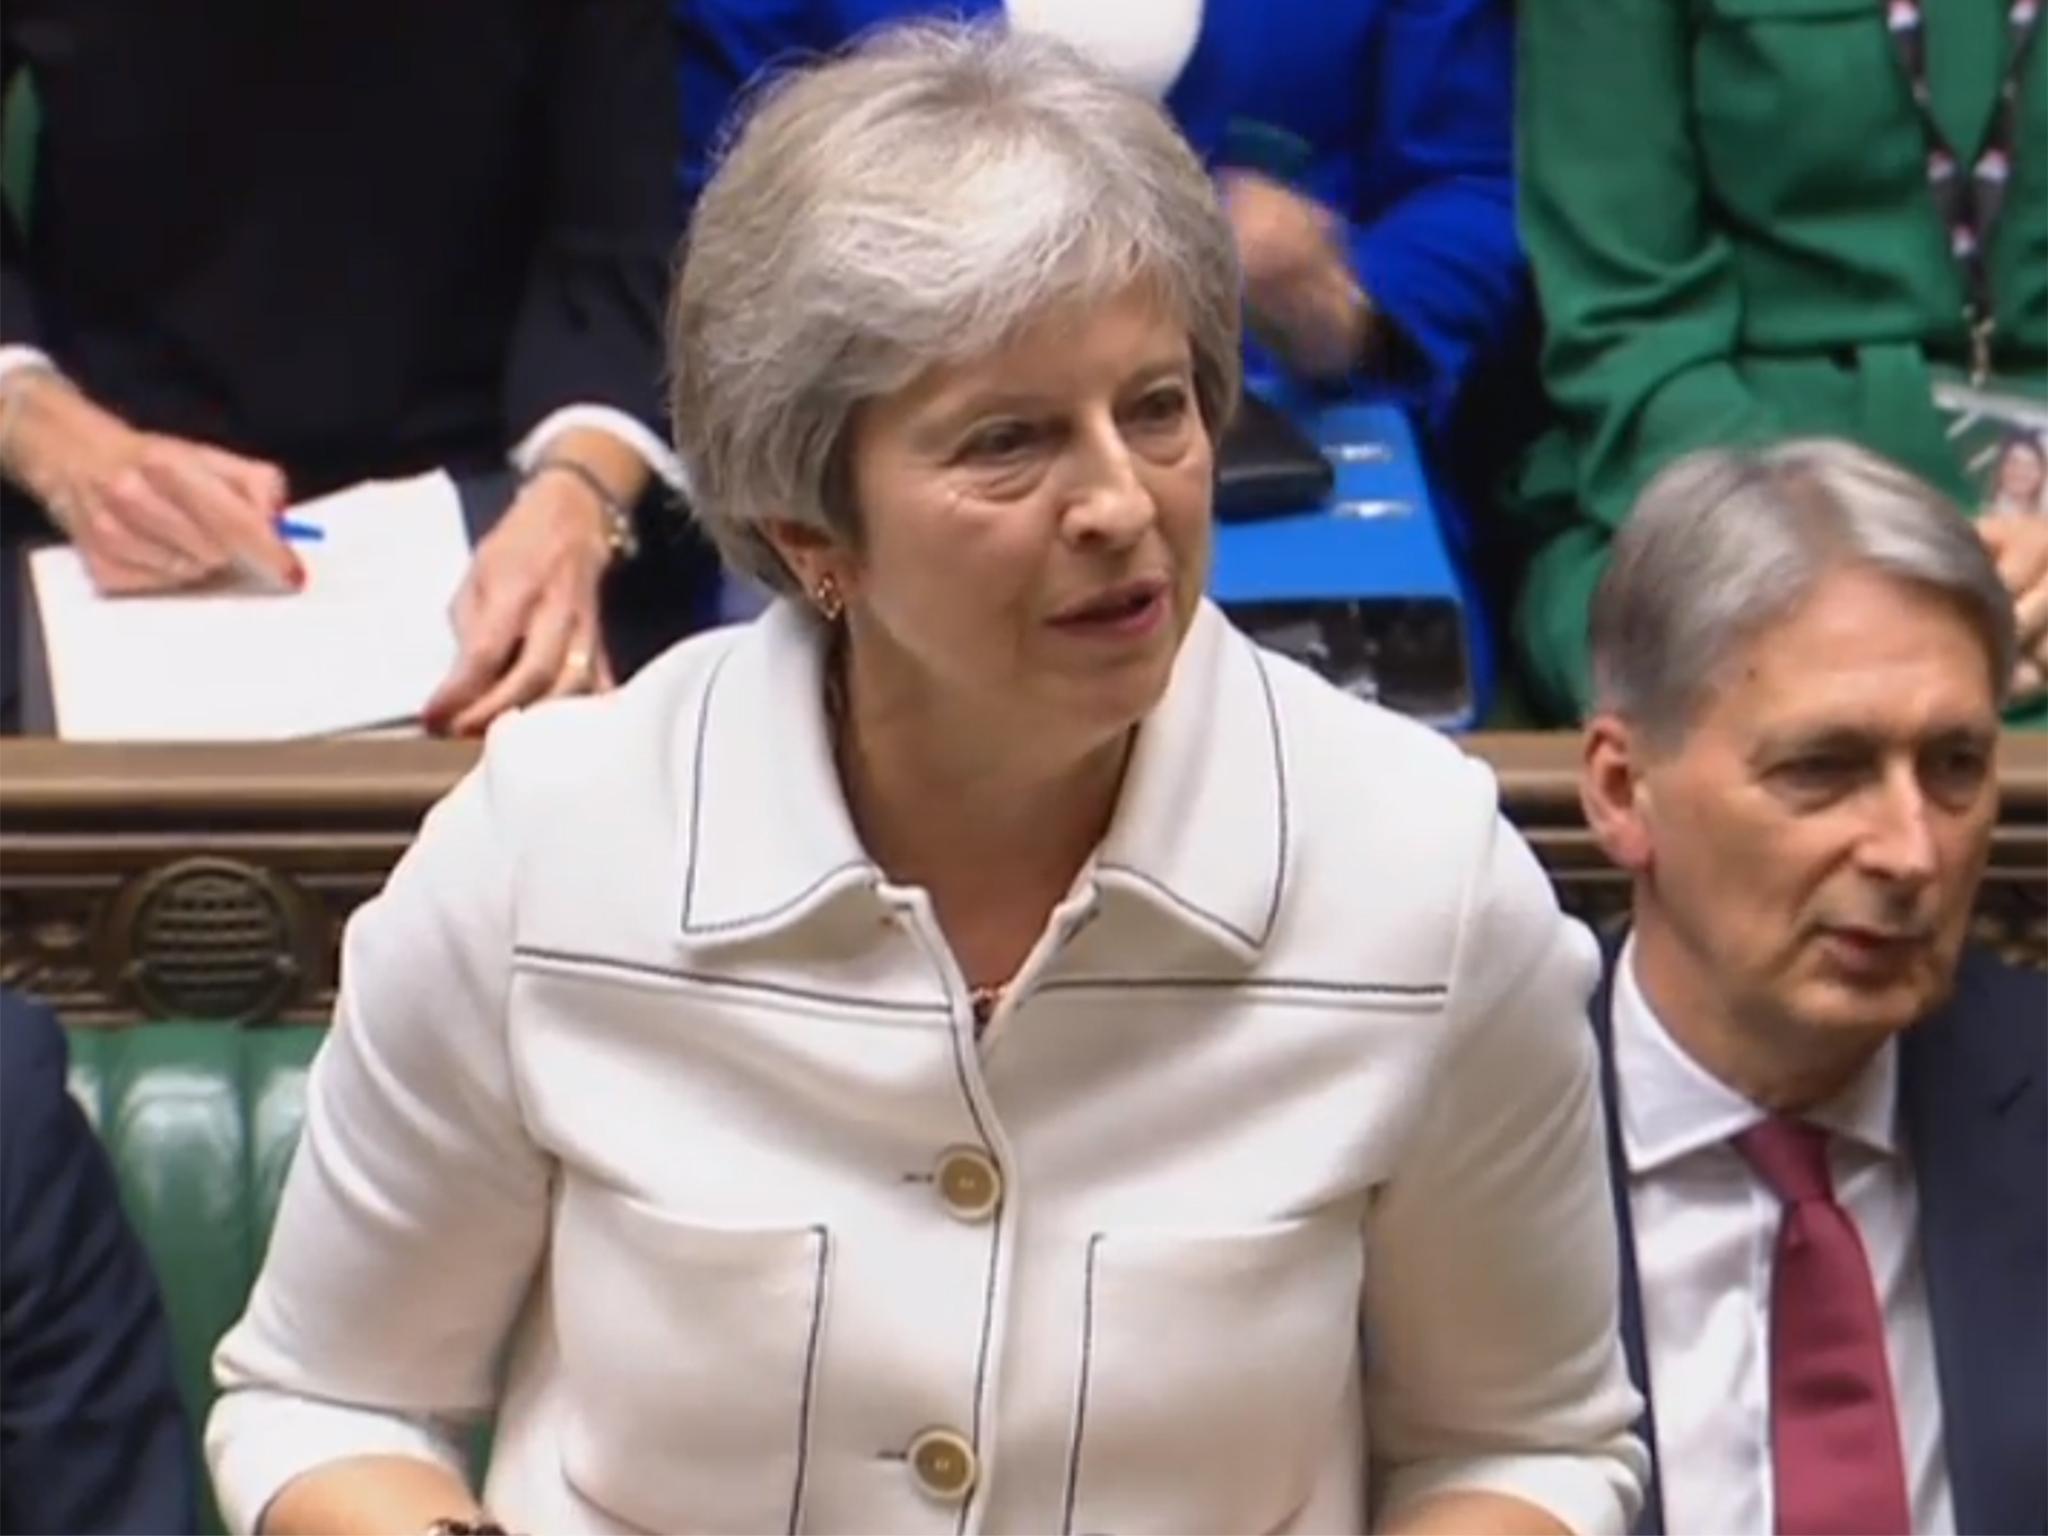 Theresa May addressing the House of Commons on Monday